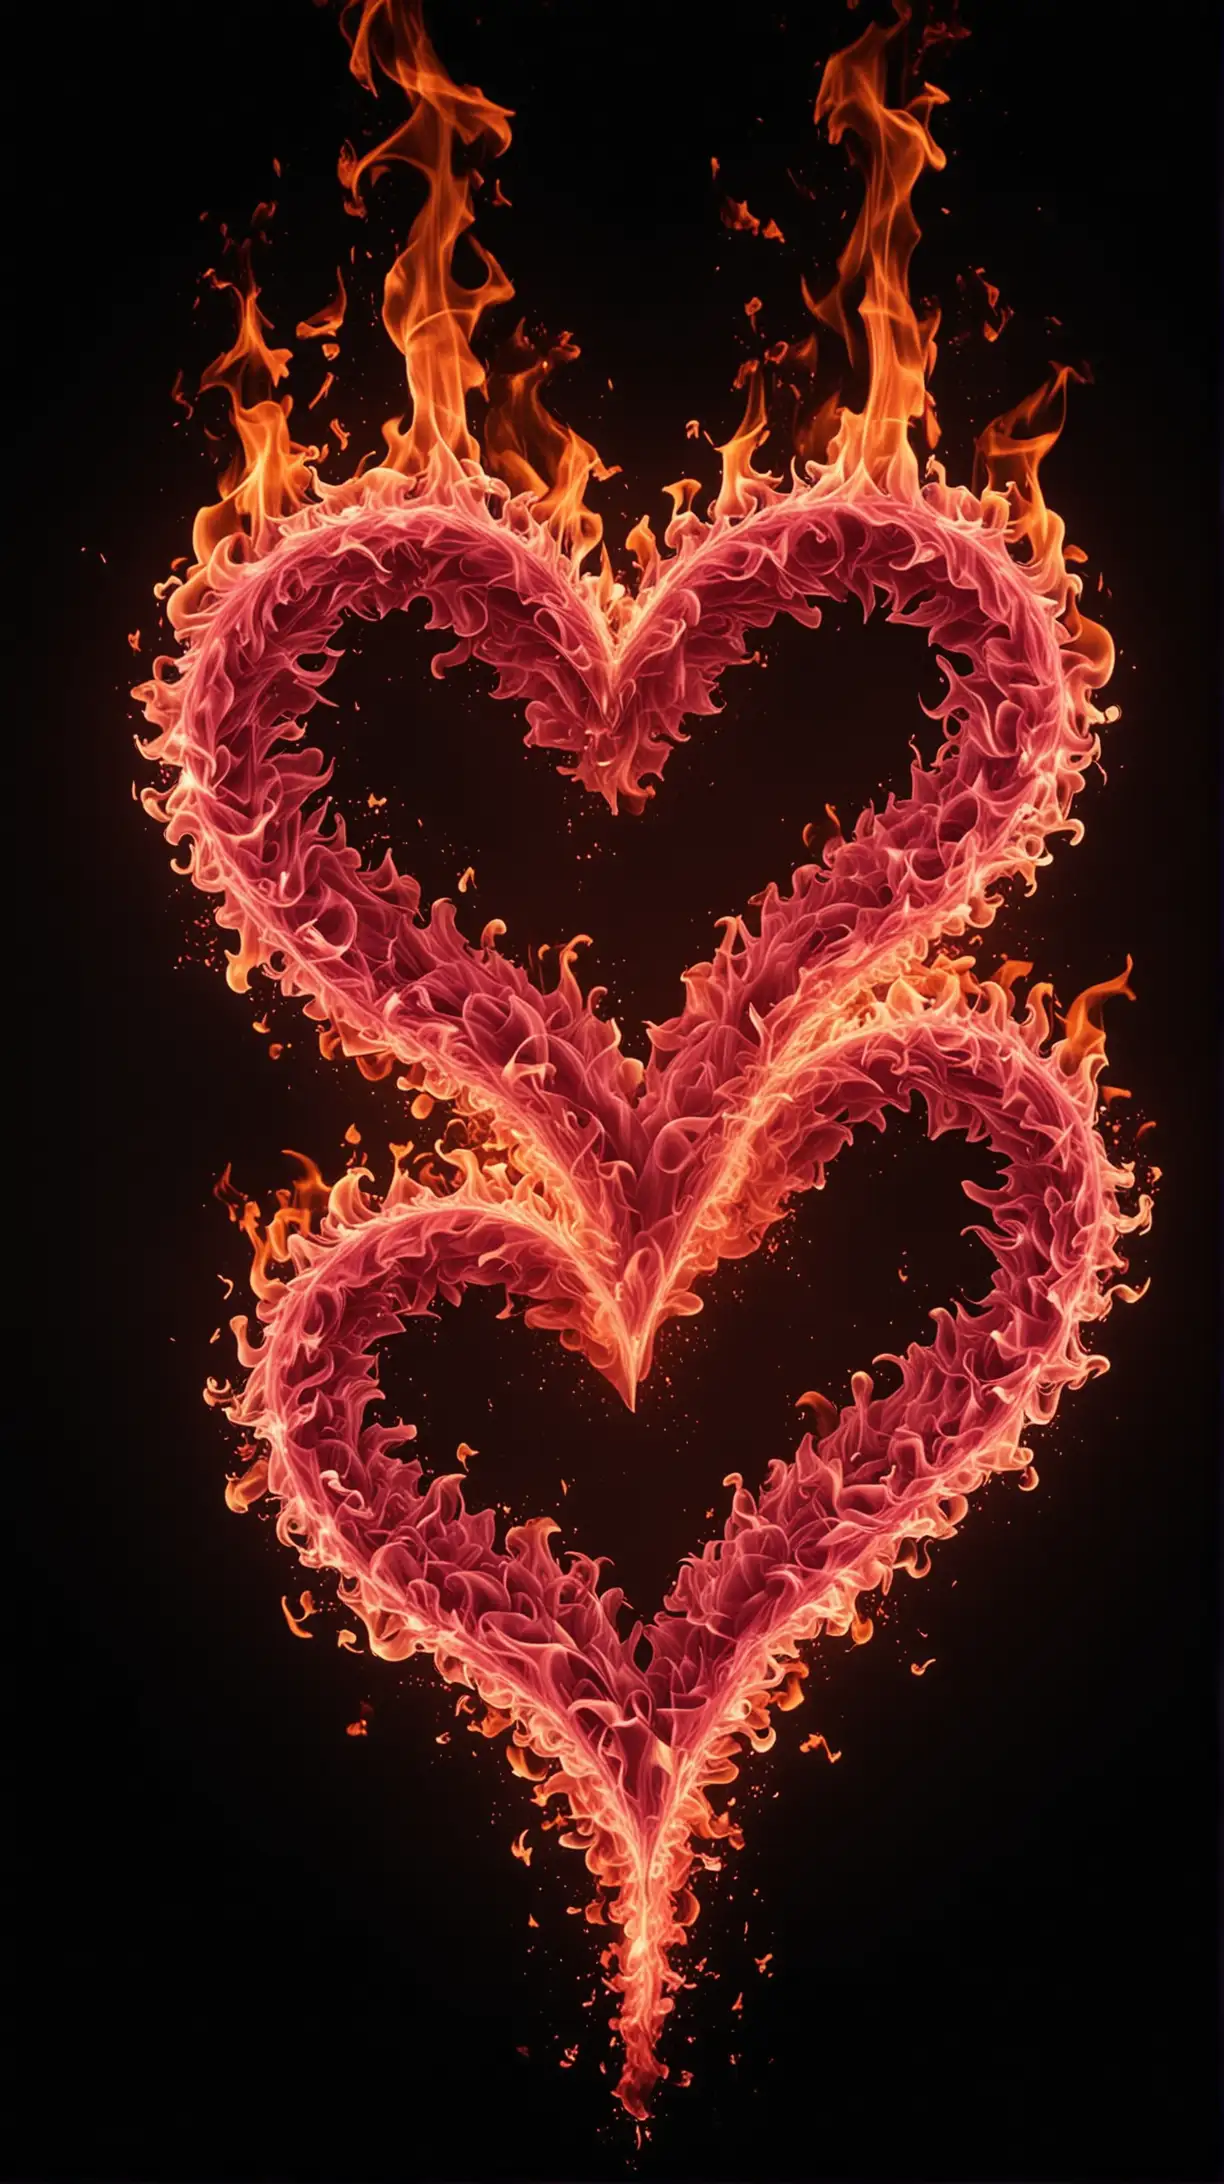 Burning Pink Flames Forming Hearts on Black Background